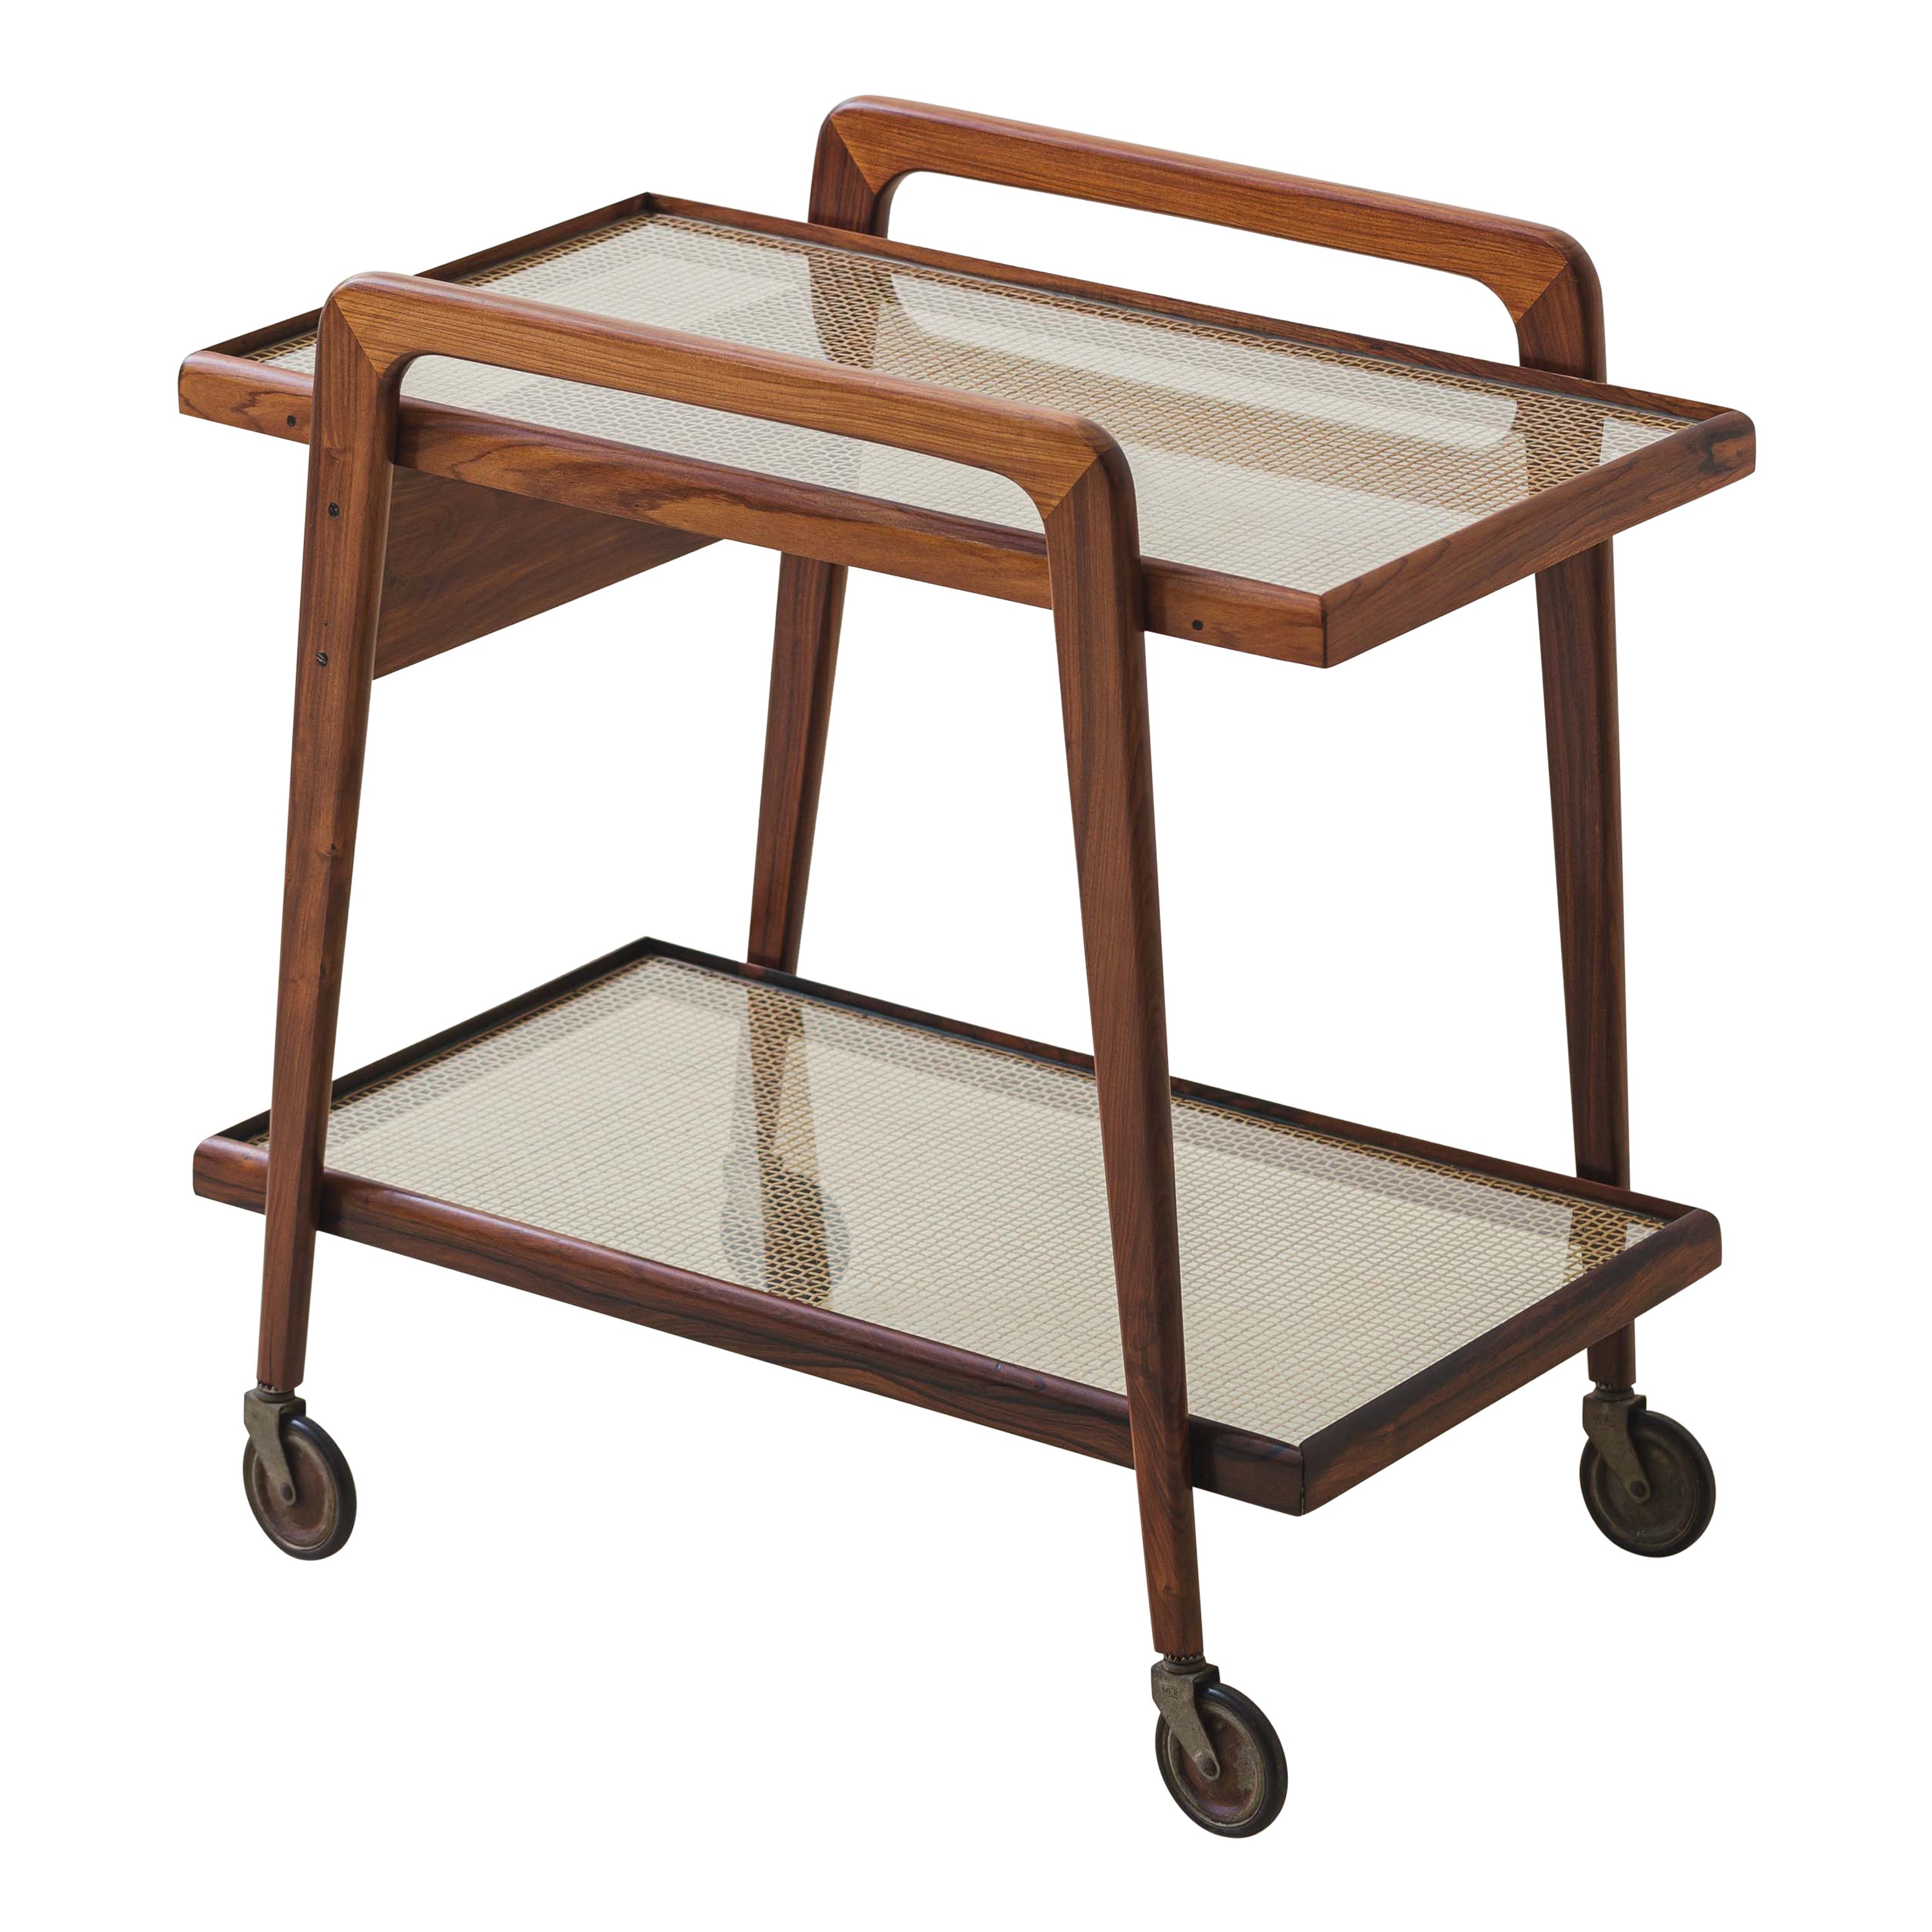 Cane Bar Cart by Carlo Hauner and Martin Eisler, 1950s, Forma S.A., Brazil